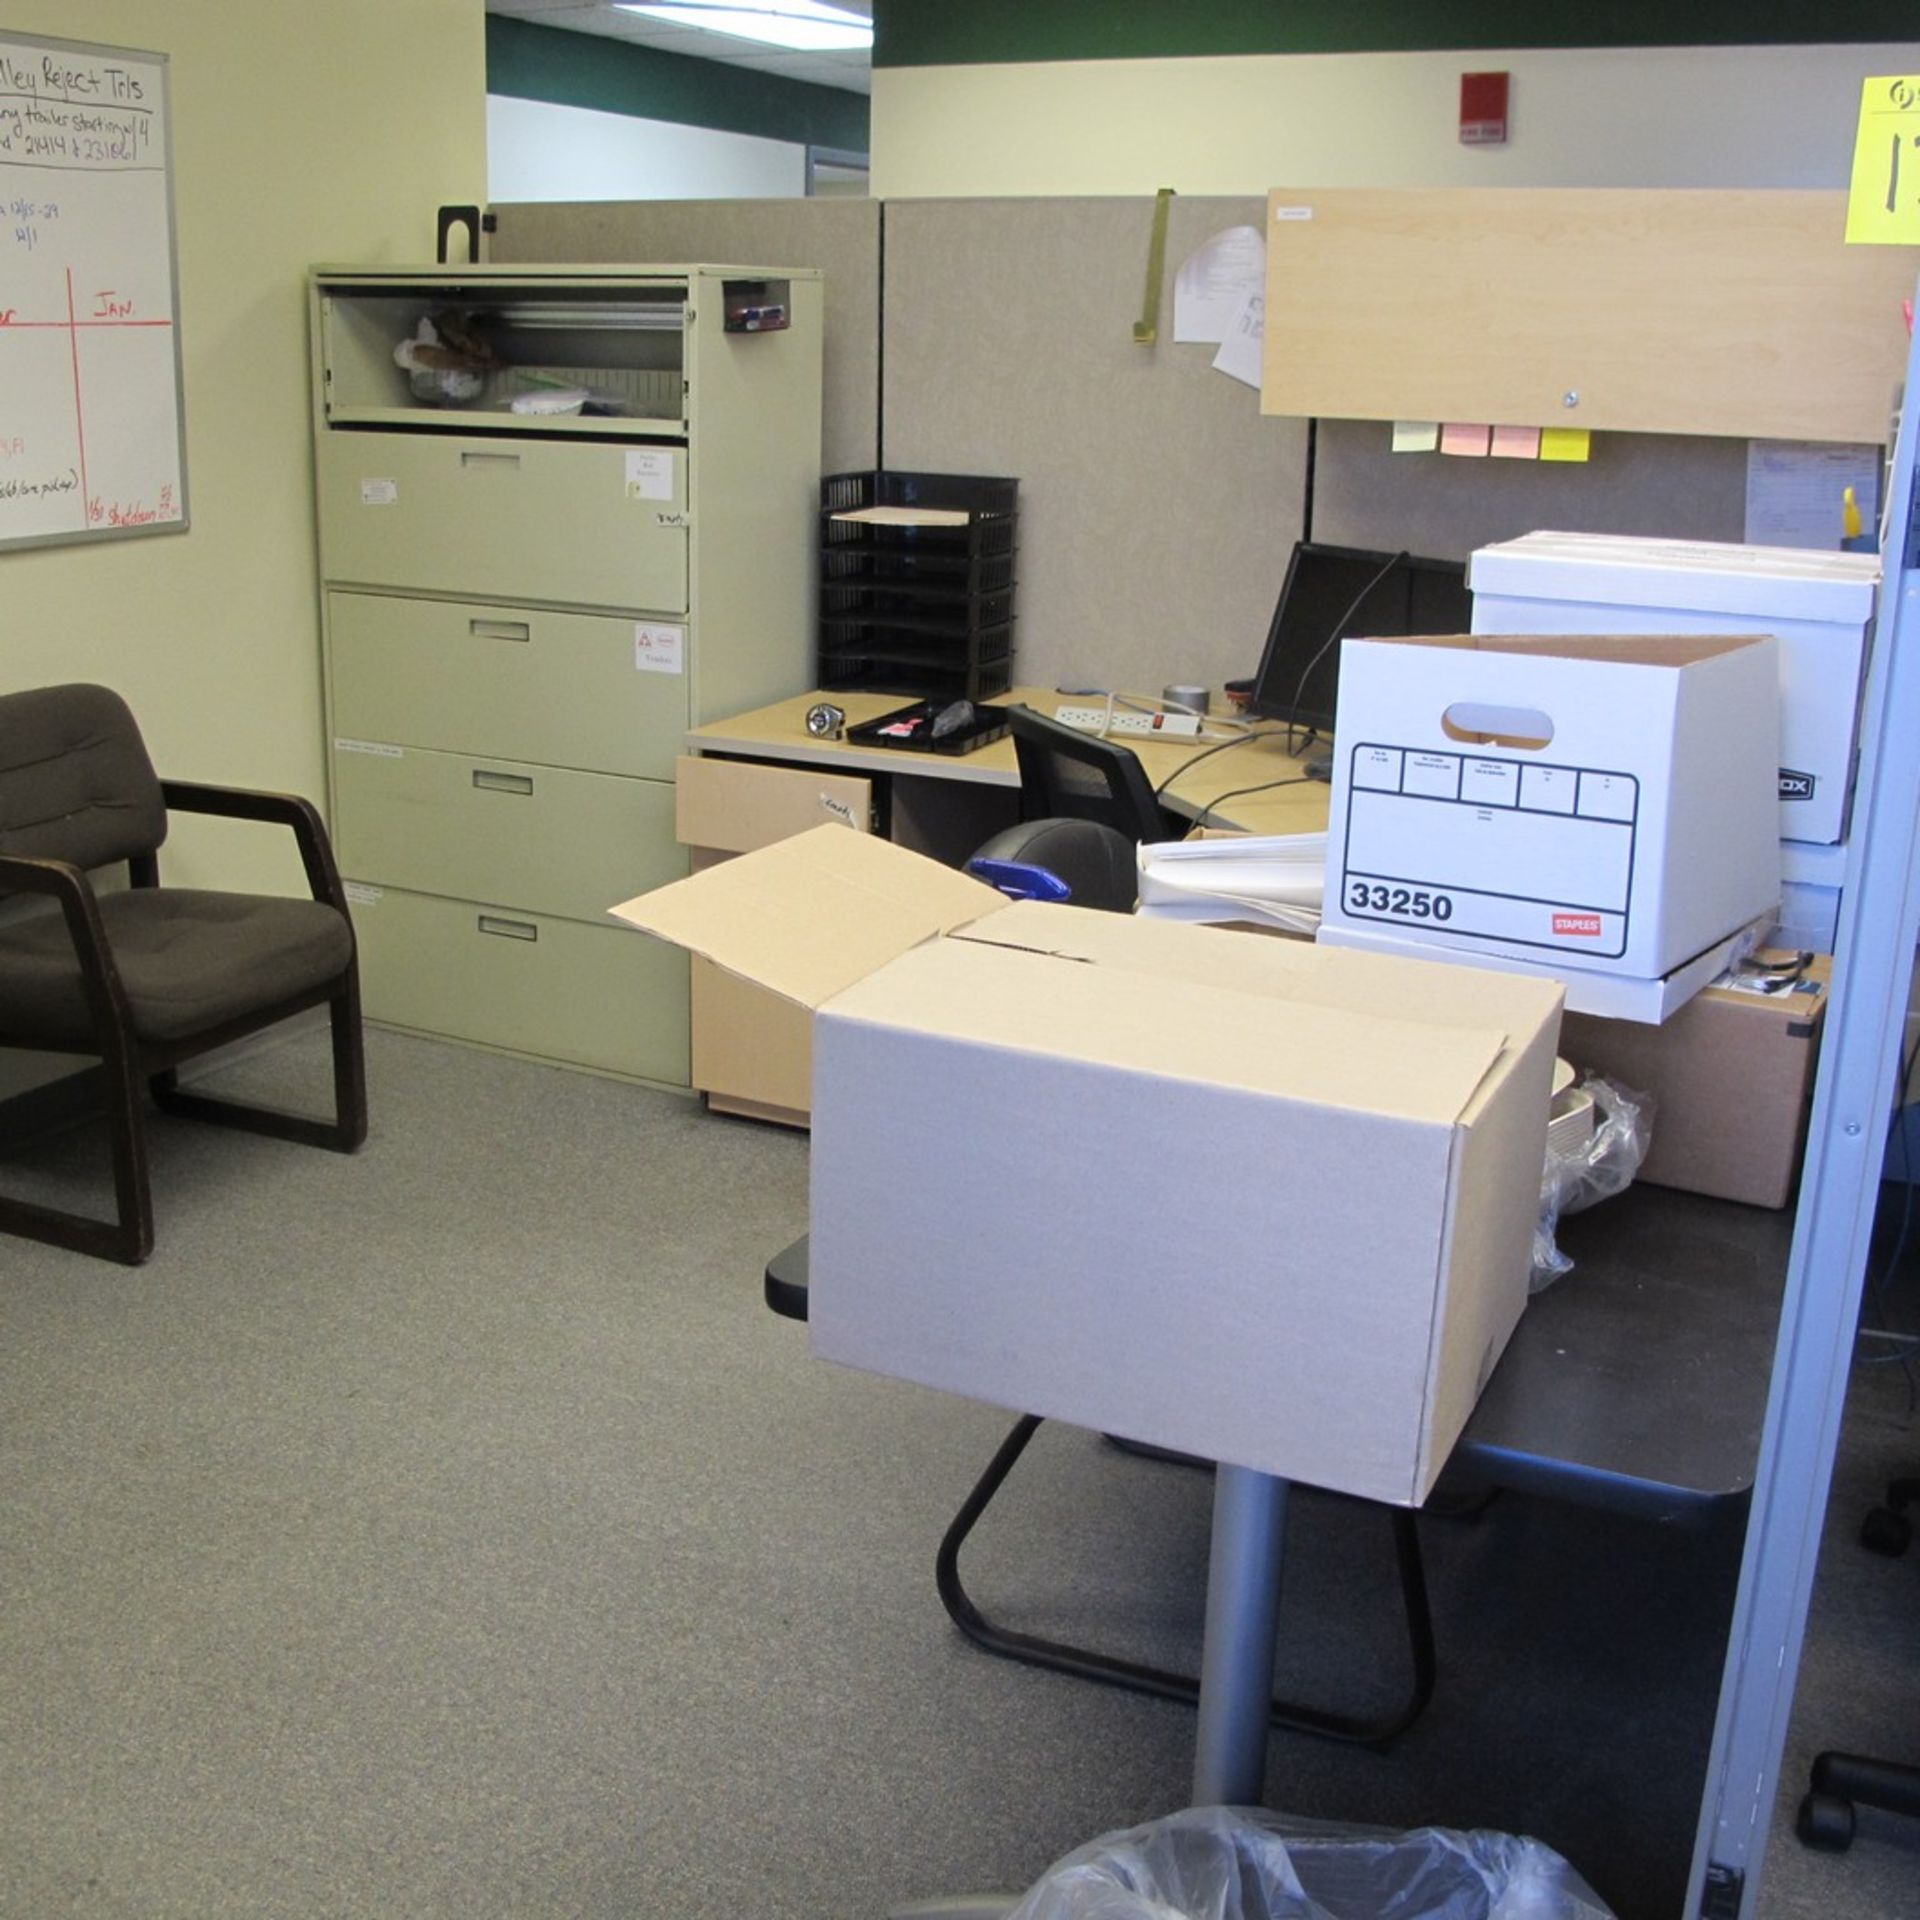 LOT OF 2-PERSON WORKSATION W/ DIVIDERS, UPPER CABINETS, DESKS, (5) FILE CABINETS, TABLE, SMALL DESK, - Image 3 of 7